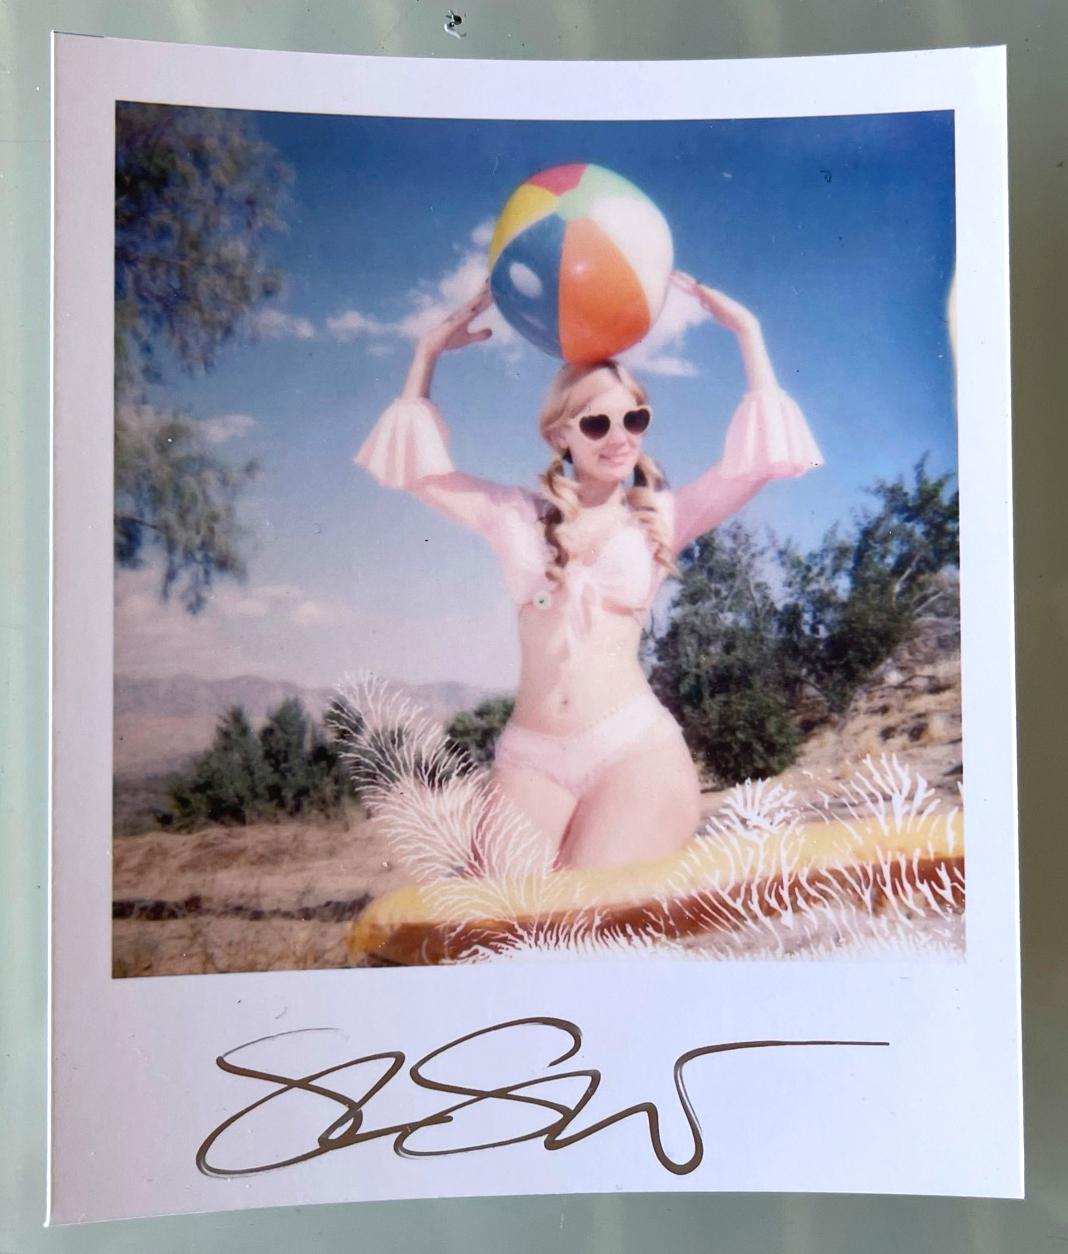 Stefanie Schneider's Mini
Miss Moneypenny with Beachball (Heavenly Falls) -

signed in front, not mounted. 
Digital Color Photographs based on a Polaroid. 

Polaroid sized open Editions 1999-2013
10.7 x 8.8cm (Image 7.9x7.7cm)

Included is a signed